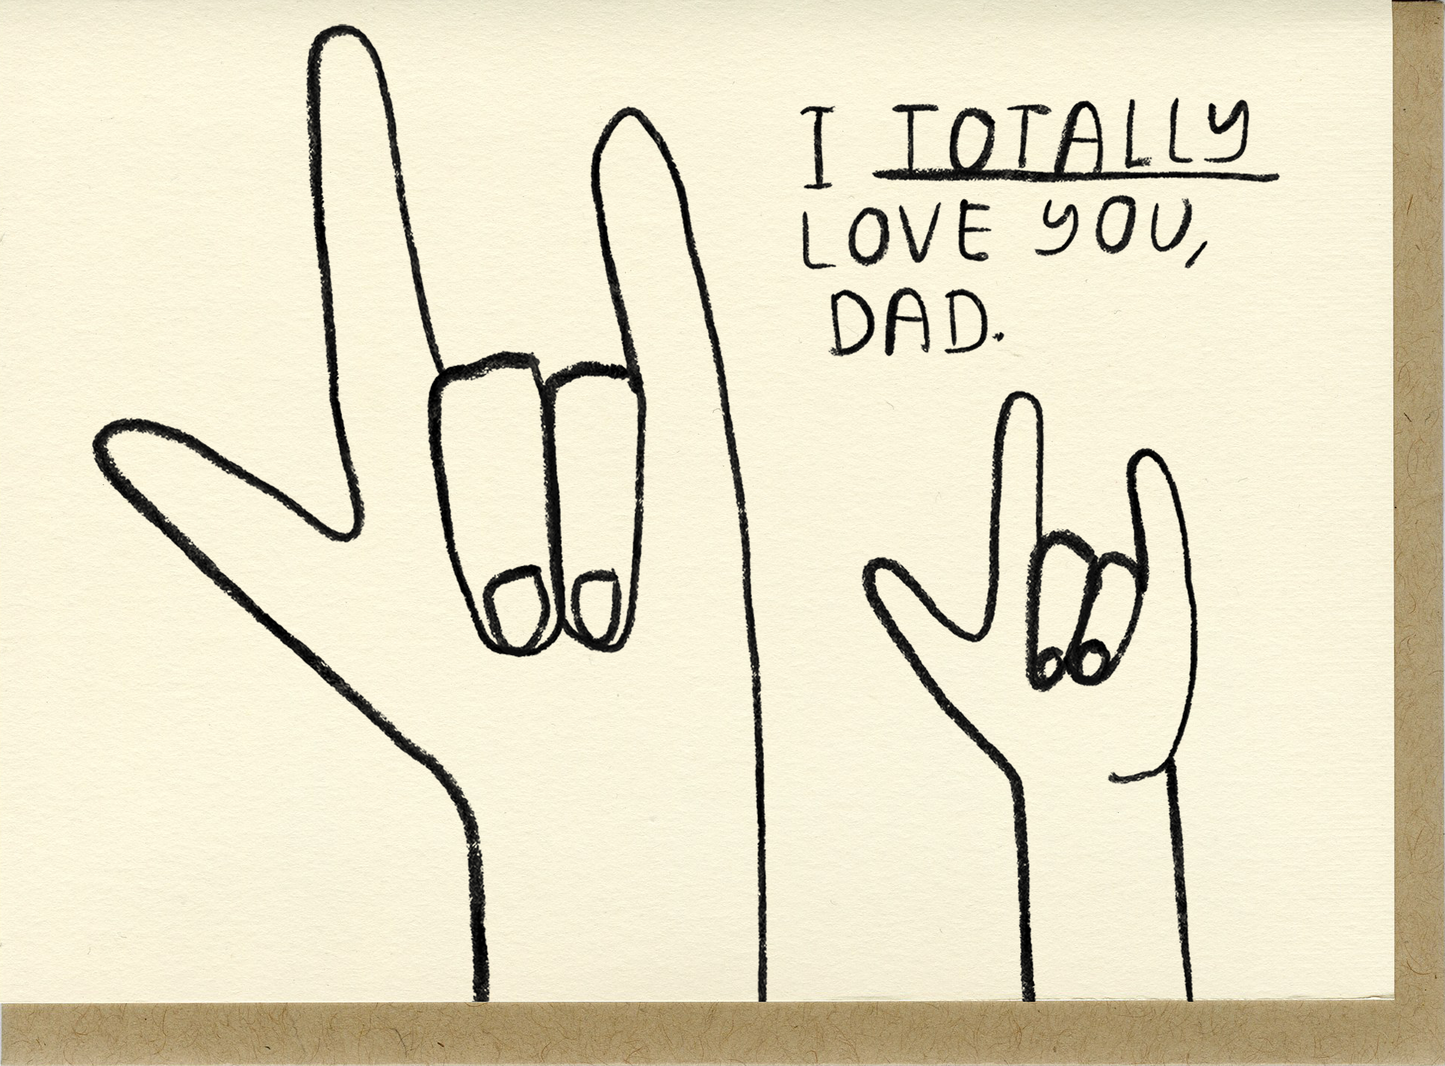 Totally Love You, Dad